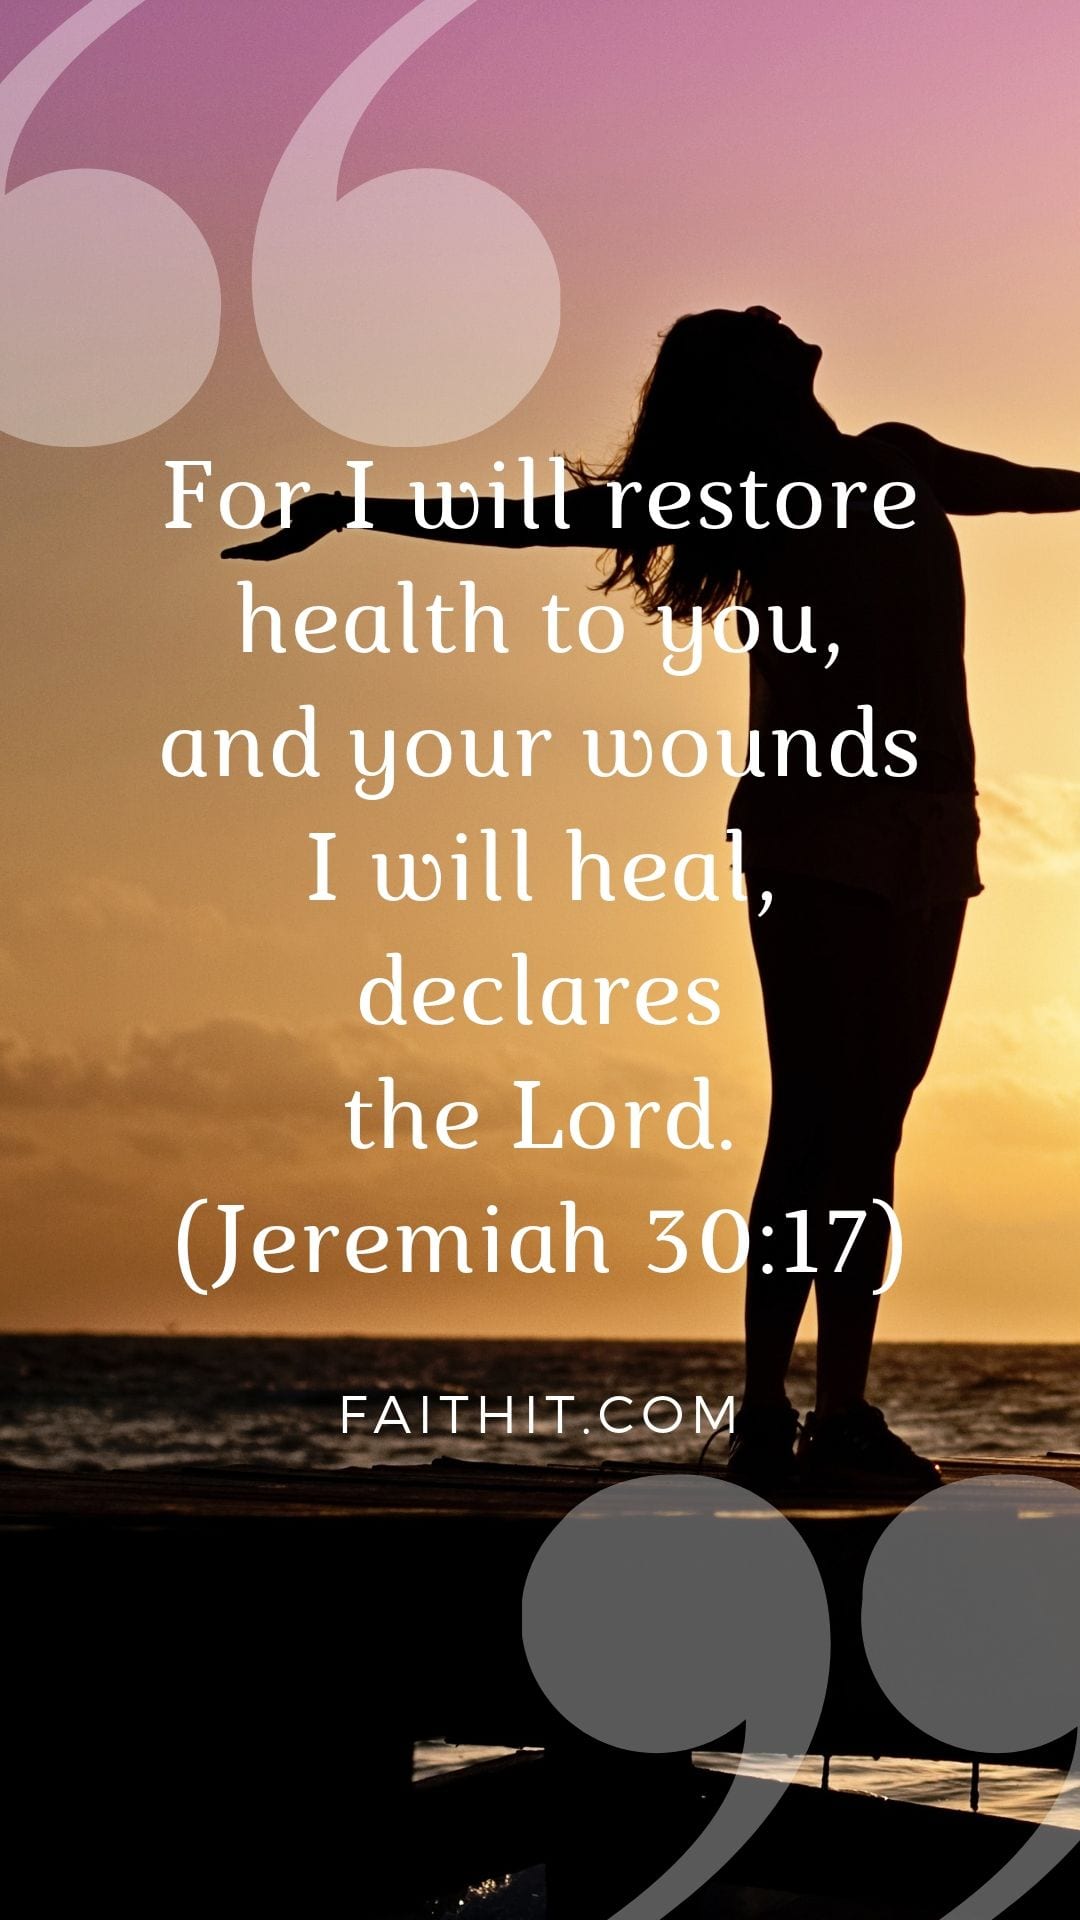 For I will restore health to you, and your wounds I will heal, declares the Lord. (Jeremiah 30:17)